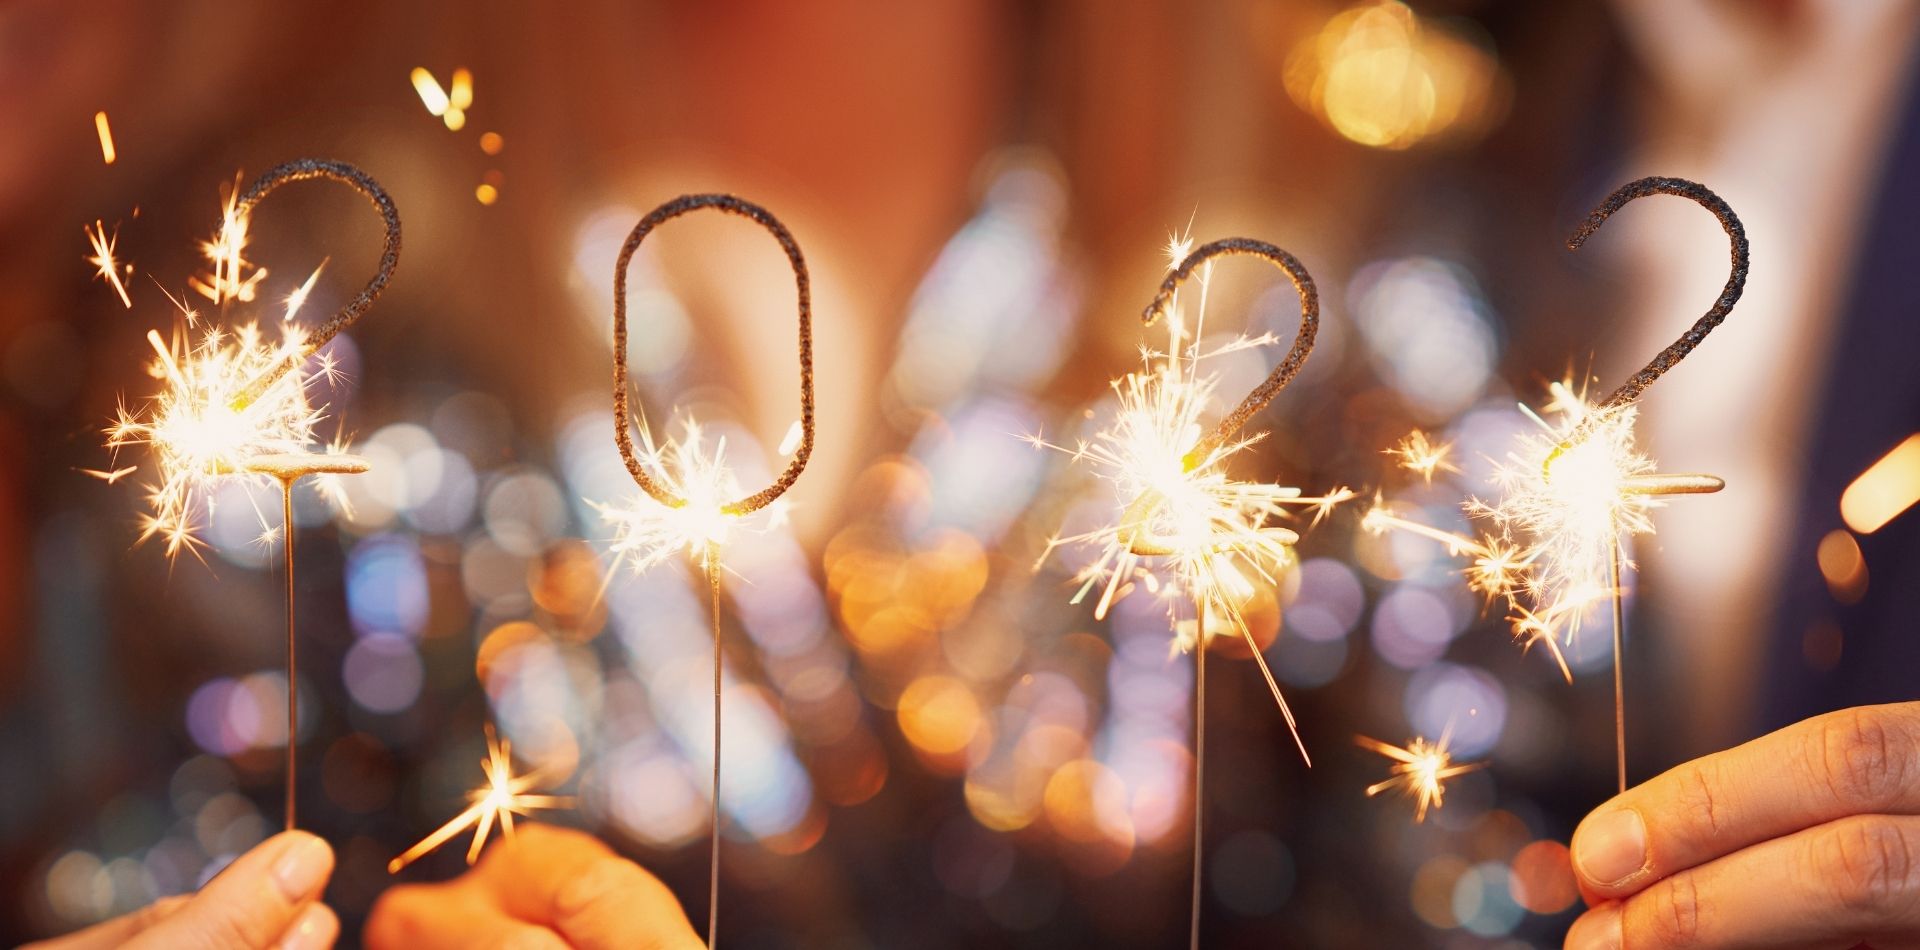 NW Metro New Years Eve Events 2021! - Twin Cities NW Metro Life